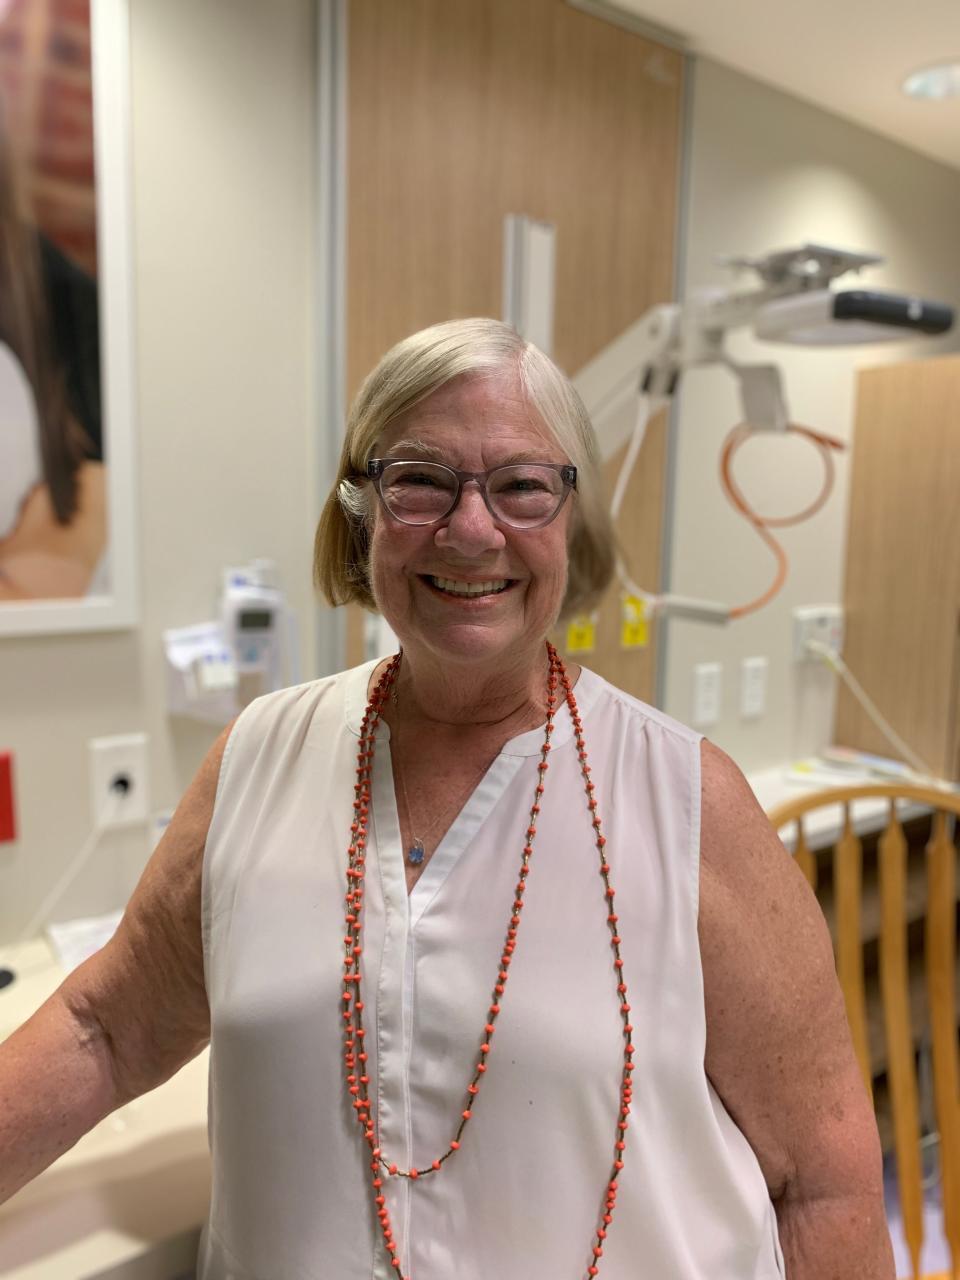 Marilyn Nydam in the Maternity Ward at Milford Regional Medical Center. Nydam recently celebrated 50 years of work at Milford Regional Medical Center.